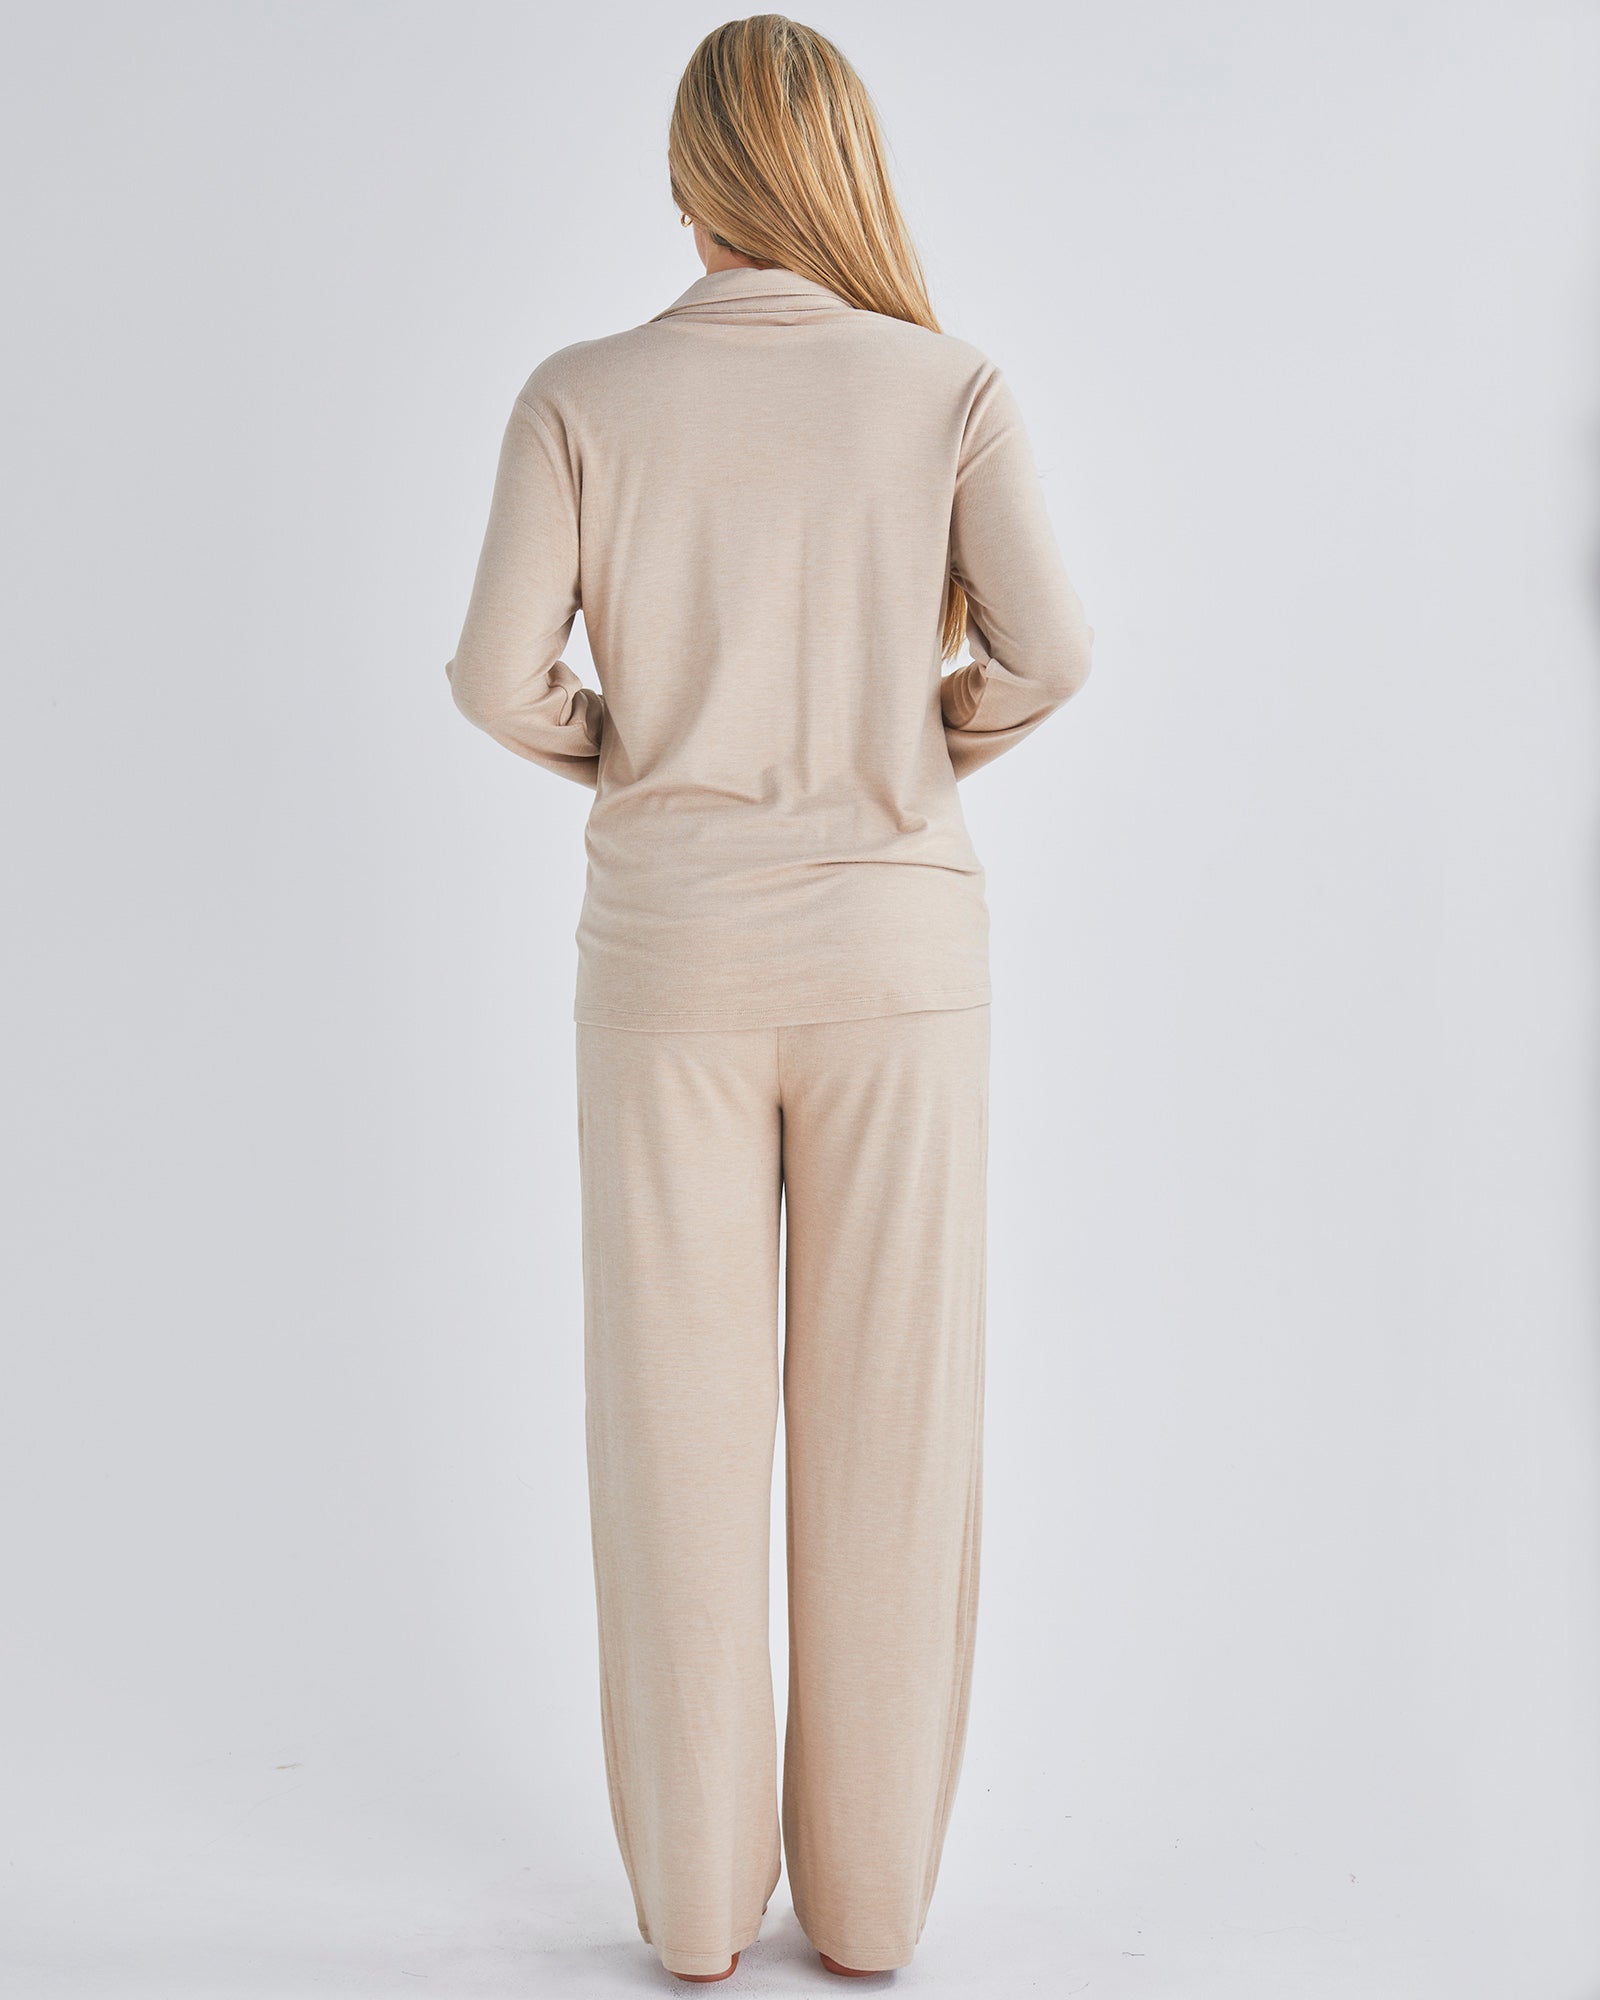 Back view - A pregnant woman wearing button front nursing freindly pyjama set in pink from Angel Maternity.